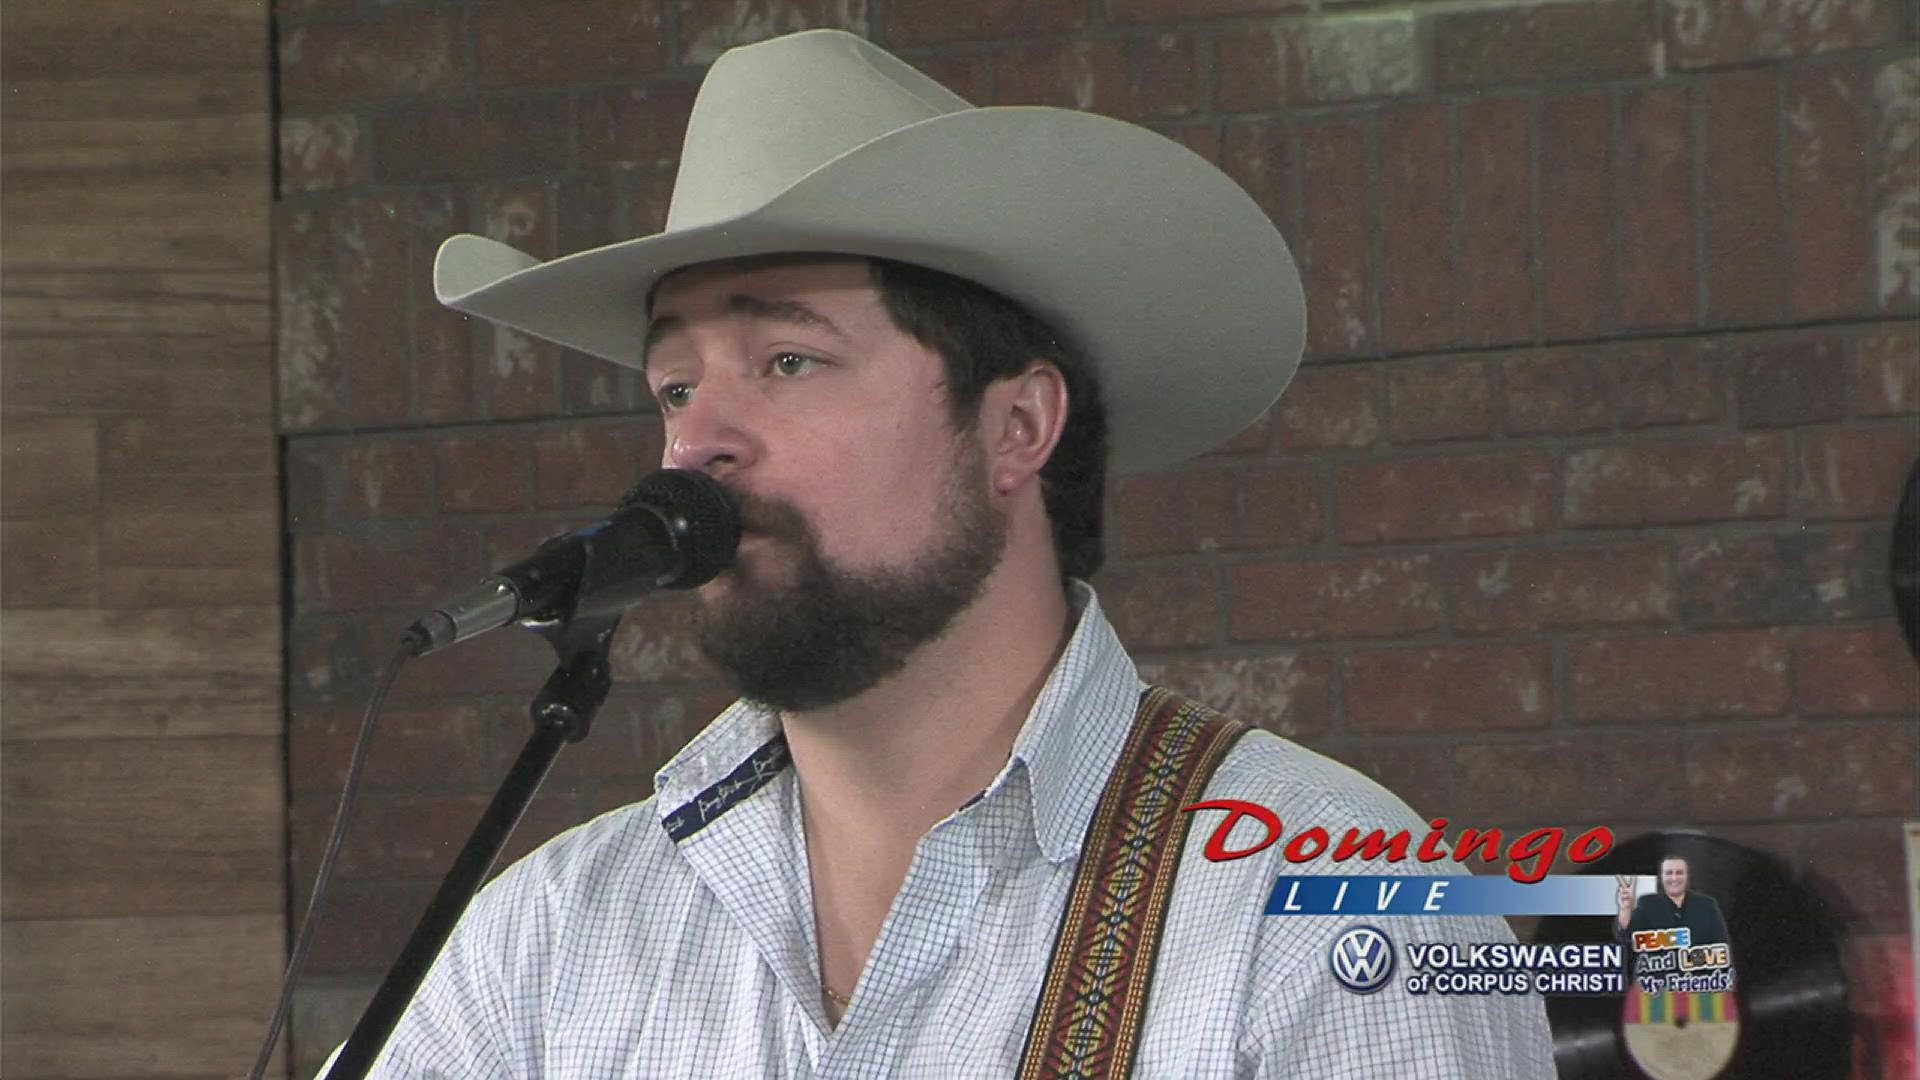 Country singer-songwriter Matthew Ryan and his band perform his single "Buzzin' On Your Love" on Domingo Live.